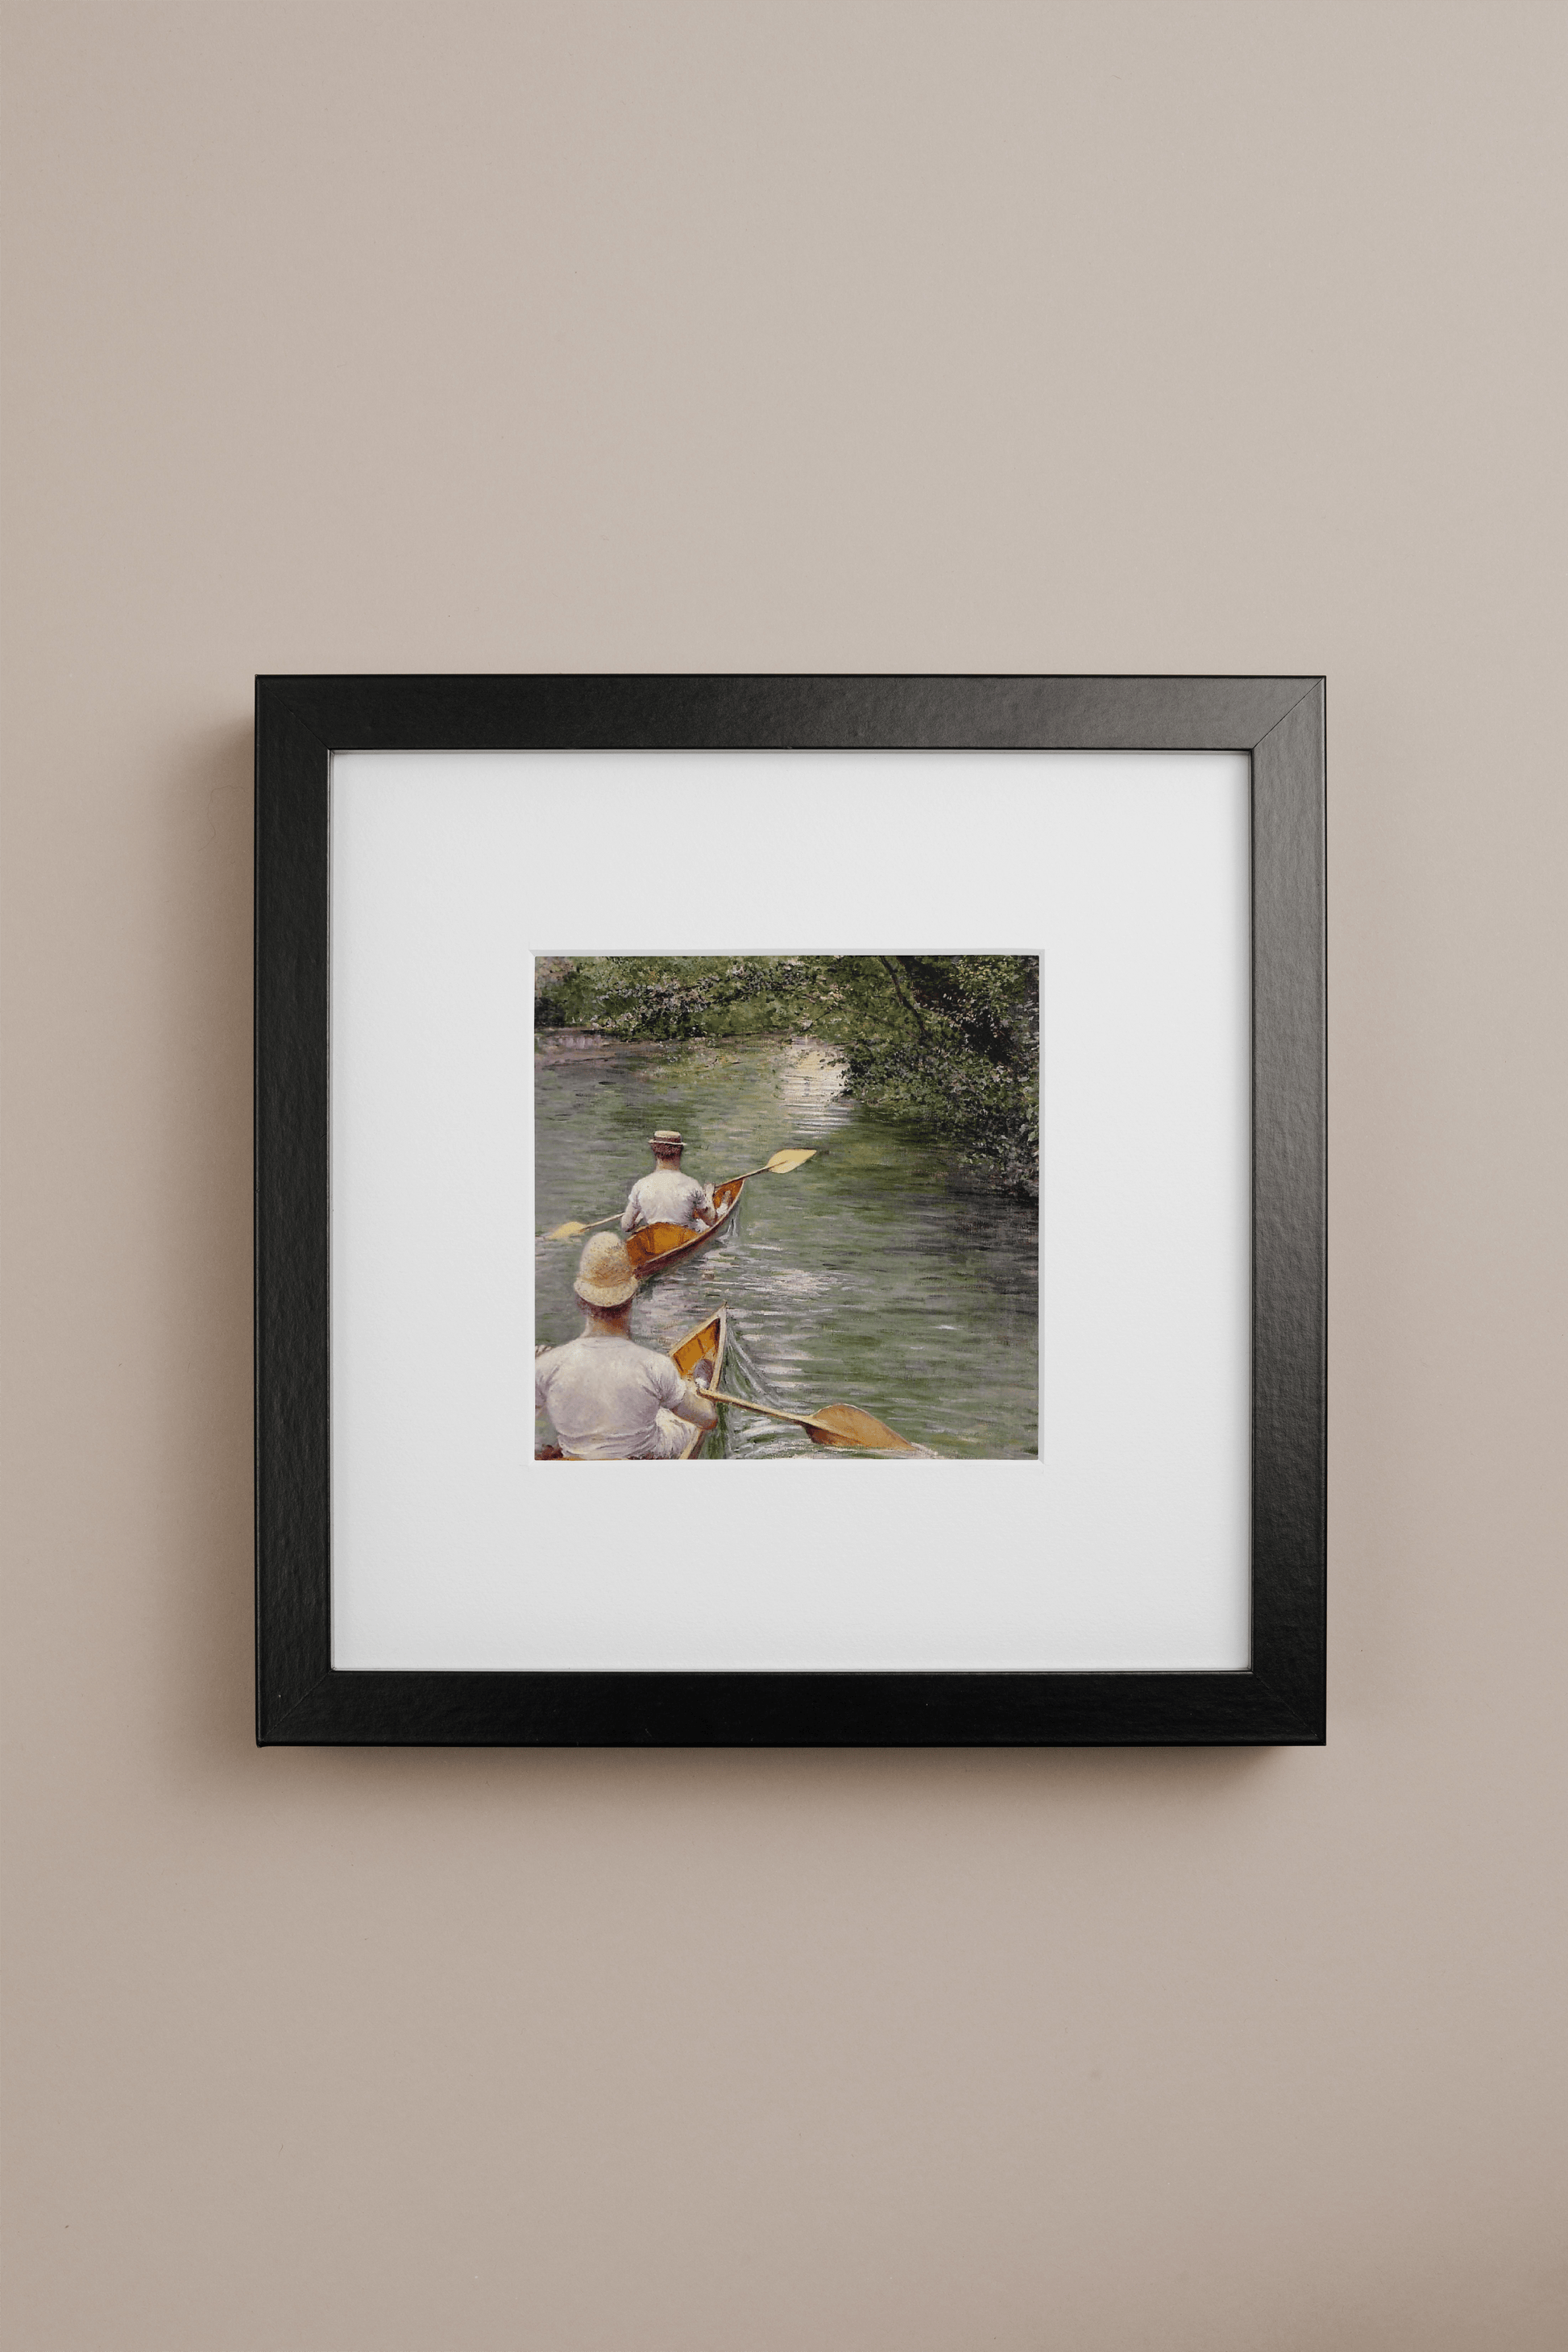 fragileHEIRLOOMS Sports and Pastimes; Showcase of Nine Prints in 11"x11" Frames, matted